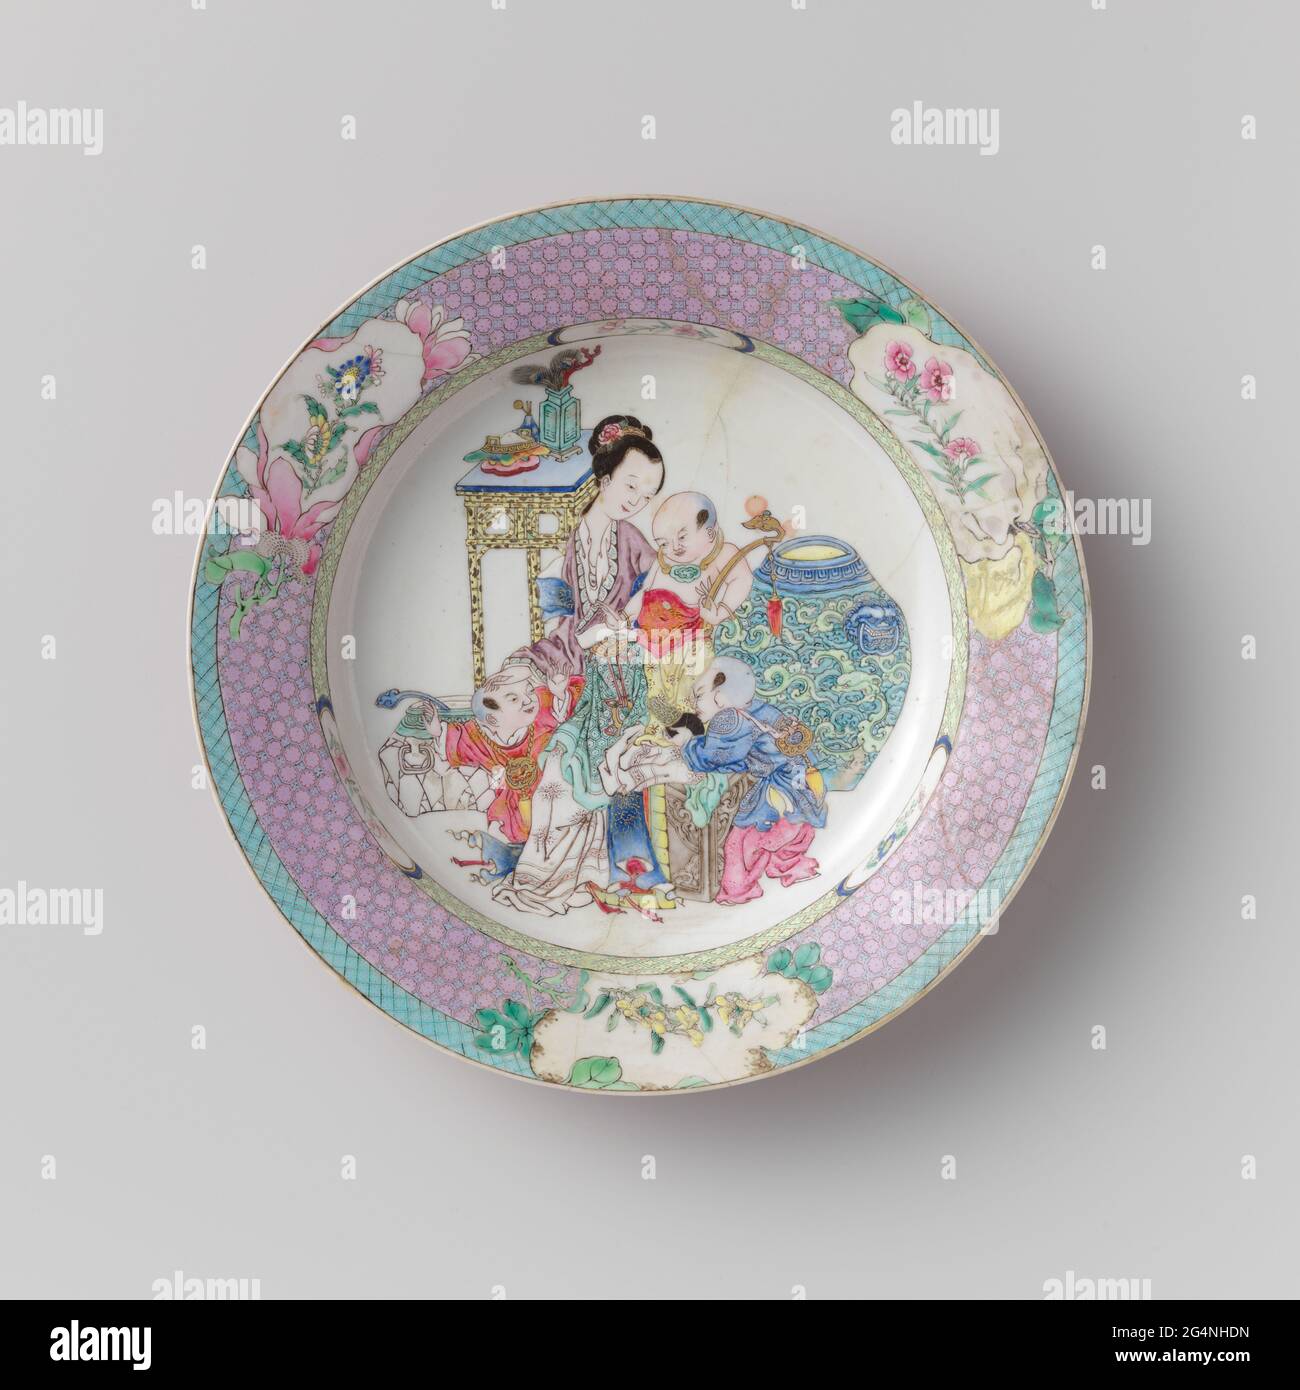 Plate with a Chinese Lady and Three Boys Among Precious Objects. Thin  porcelain plate, covered with a pink glaze and painted on the glaze in  blue, red, pink, green, yellow, turquoise, black